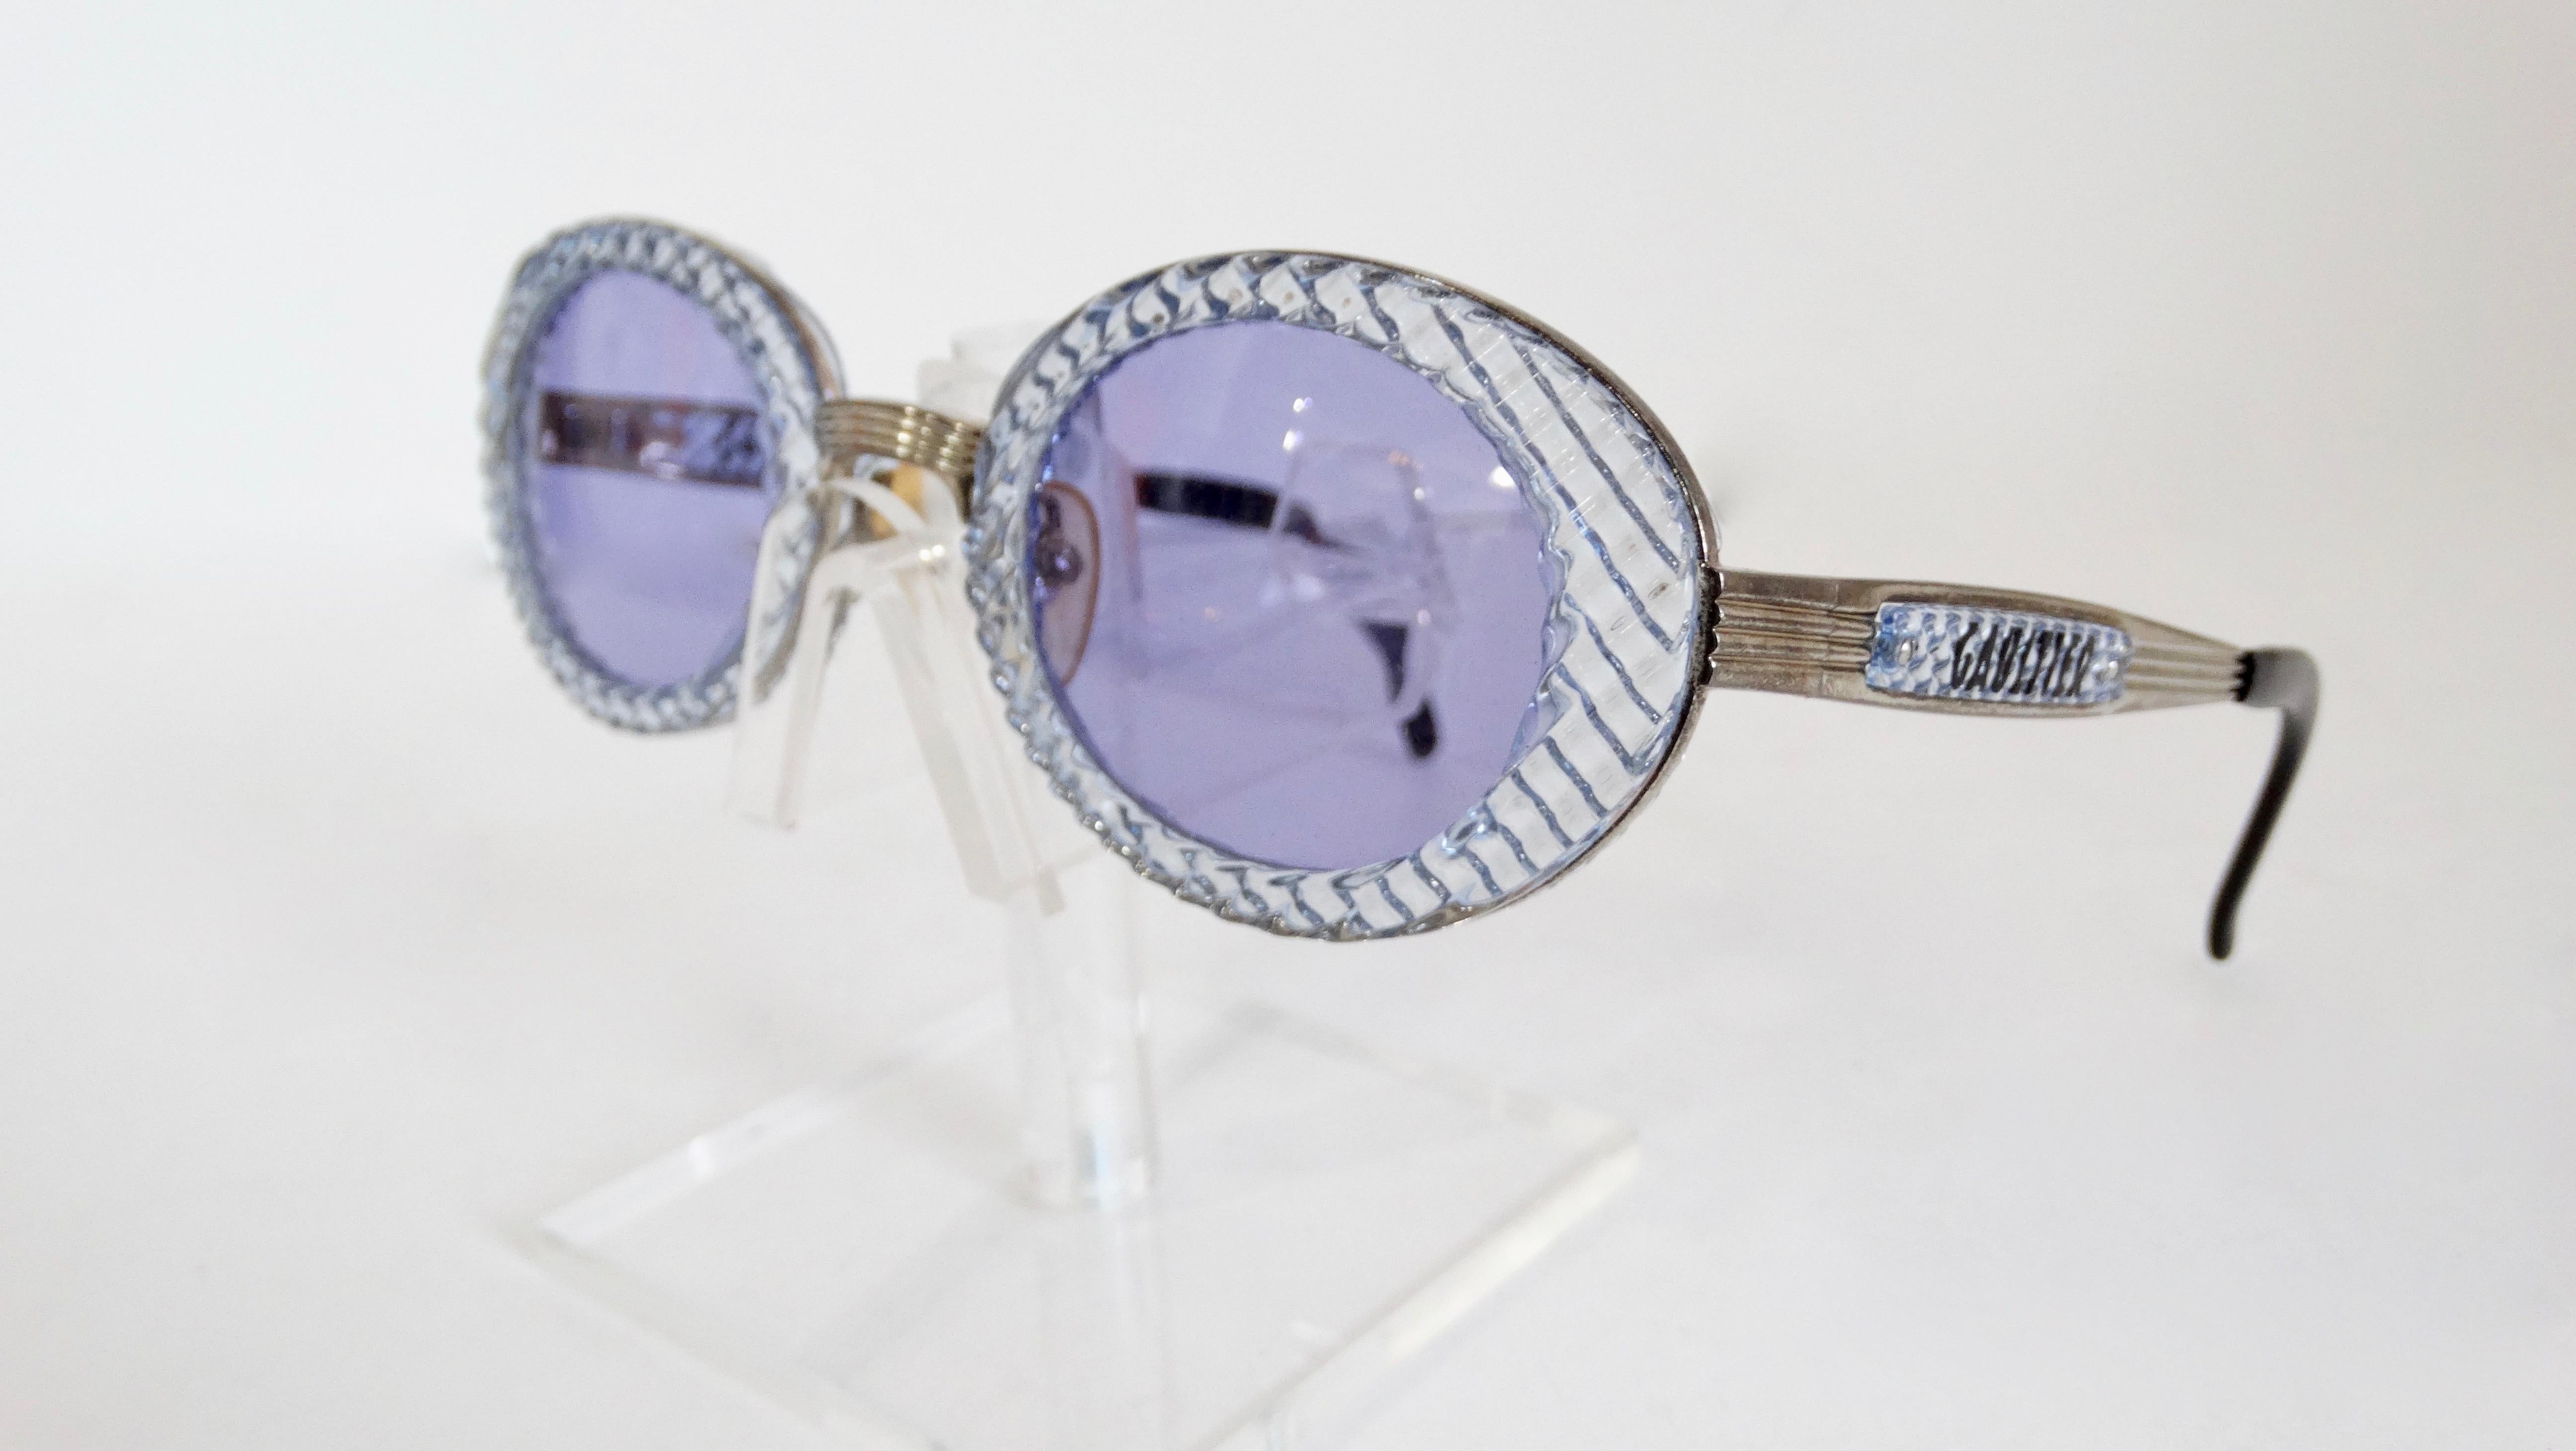 Elevate your look with these very rare John Paul Gaultier sunglasses! Circa 1990s, these sunglasses feature a translucent blue textured oval frame with blue tinted lenses. Includes silver plated hardware with 'Gaultier' on the sides. The ultimate